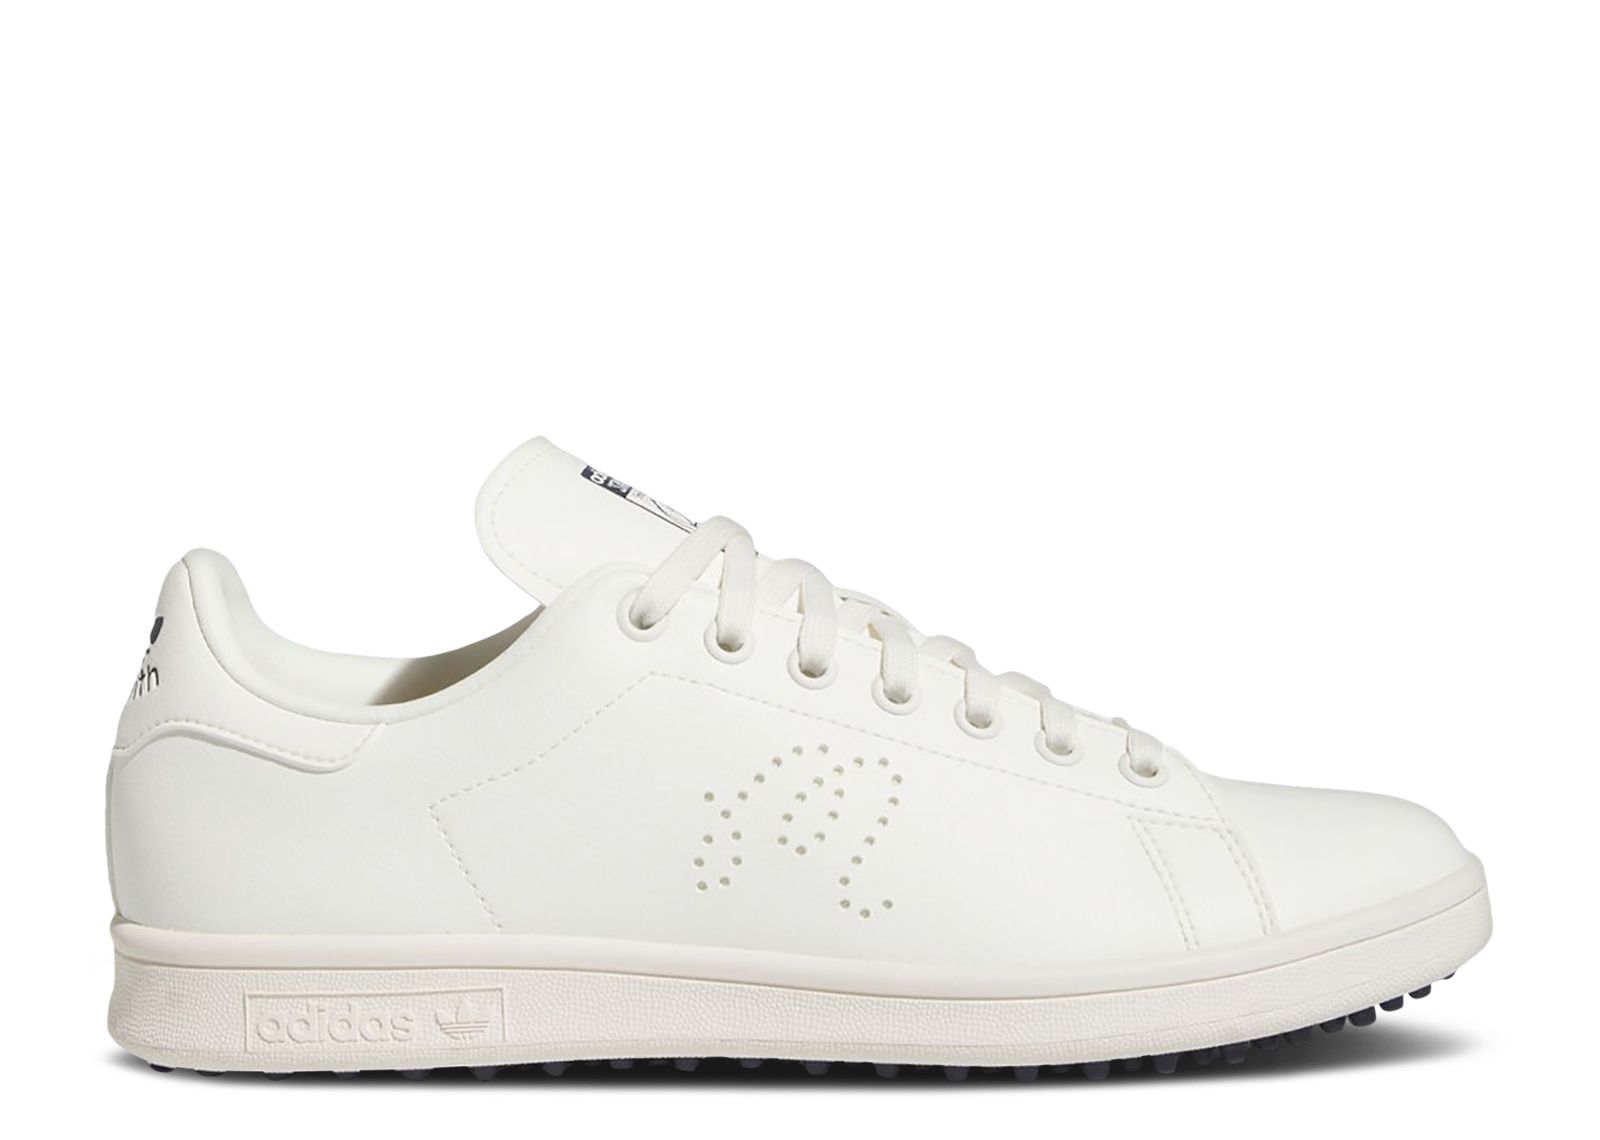 Кроссовки adidas Malbon Golf X Stan Smith Spikeless Golf 'Off White Collegiate Navy', белый size 40 45 men spikeless golf shoes white waterproof antisideslip with removable shoe pin breathable golf training mens trainers